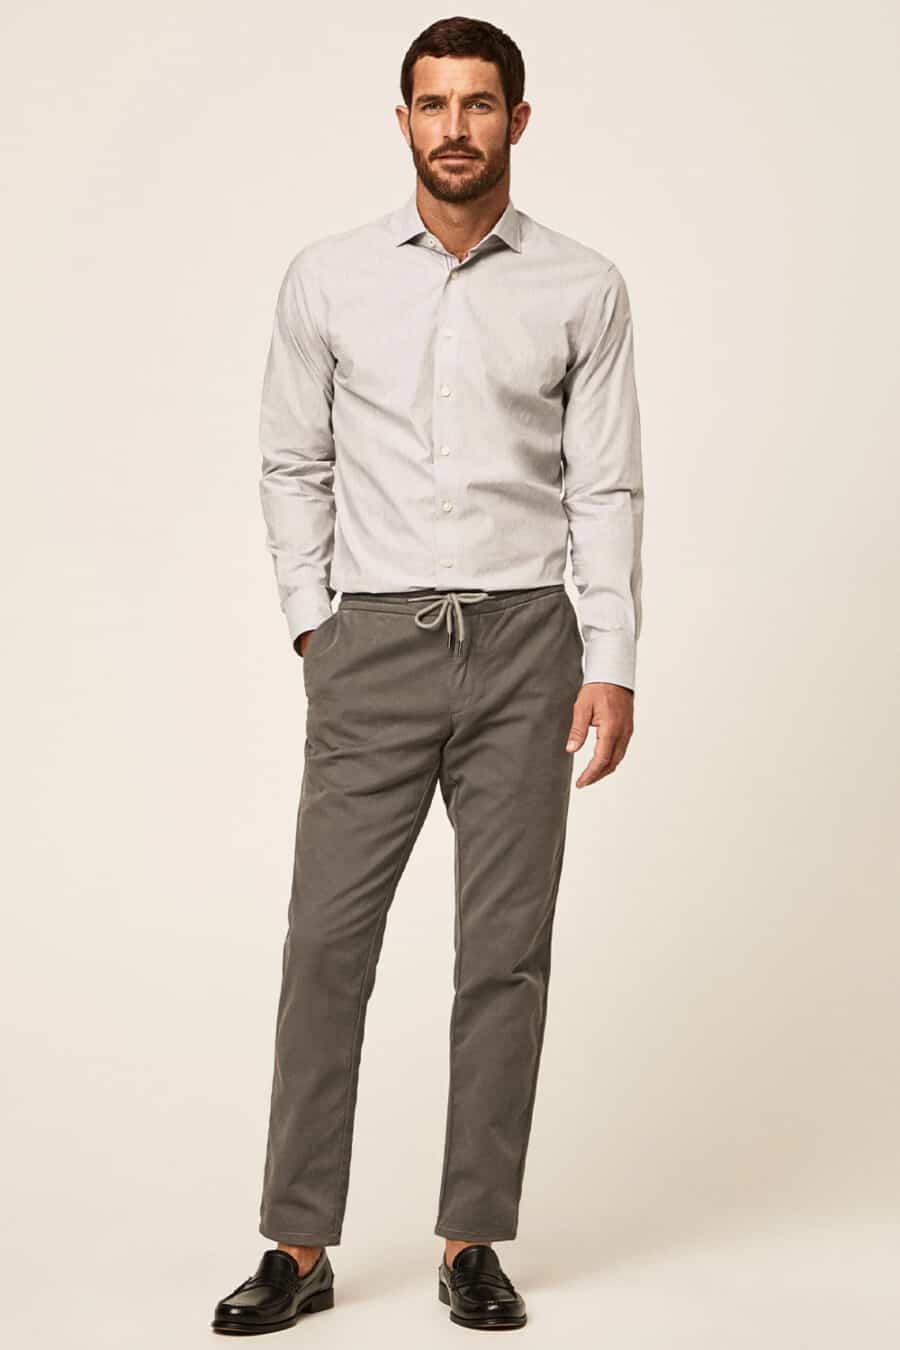 Men's grey drawstring pants, light grey shirt and black leather loafers outfit